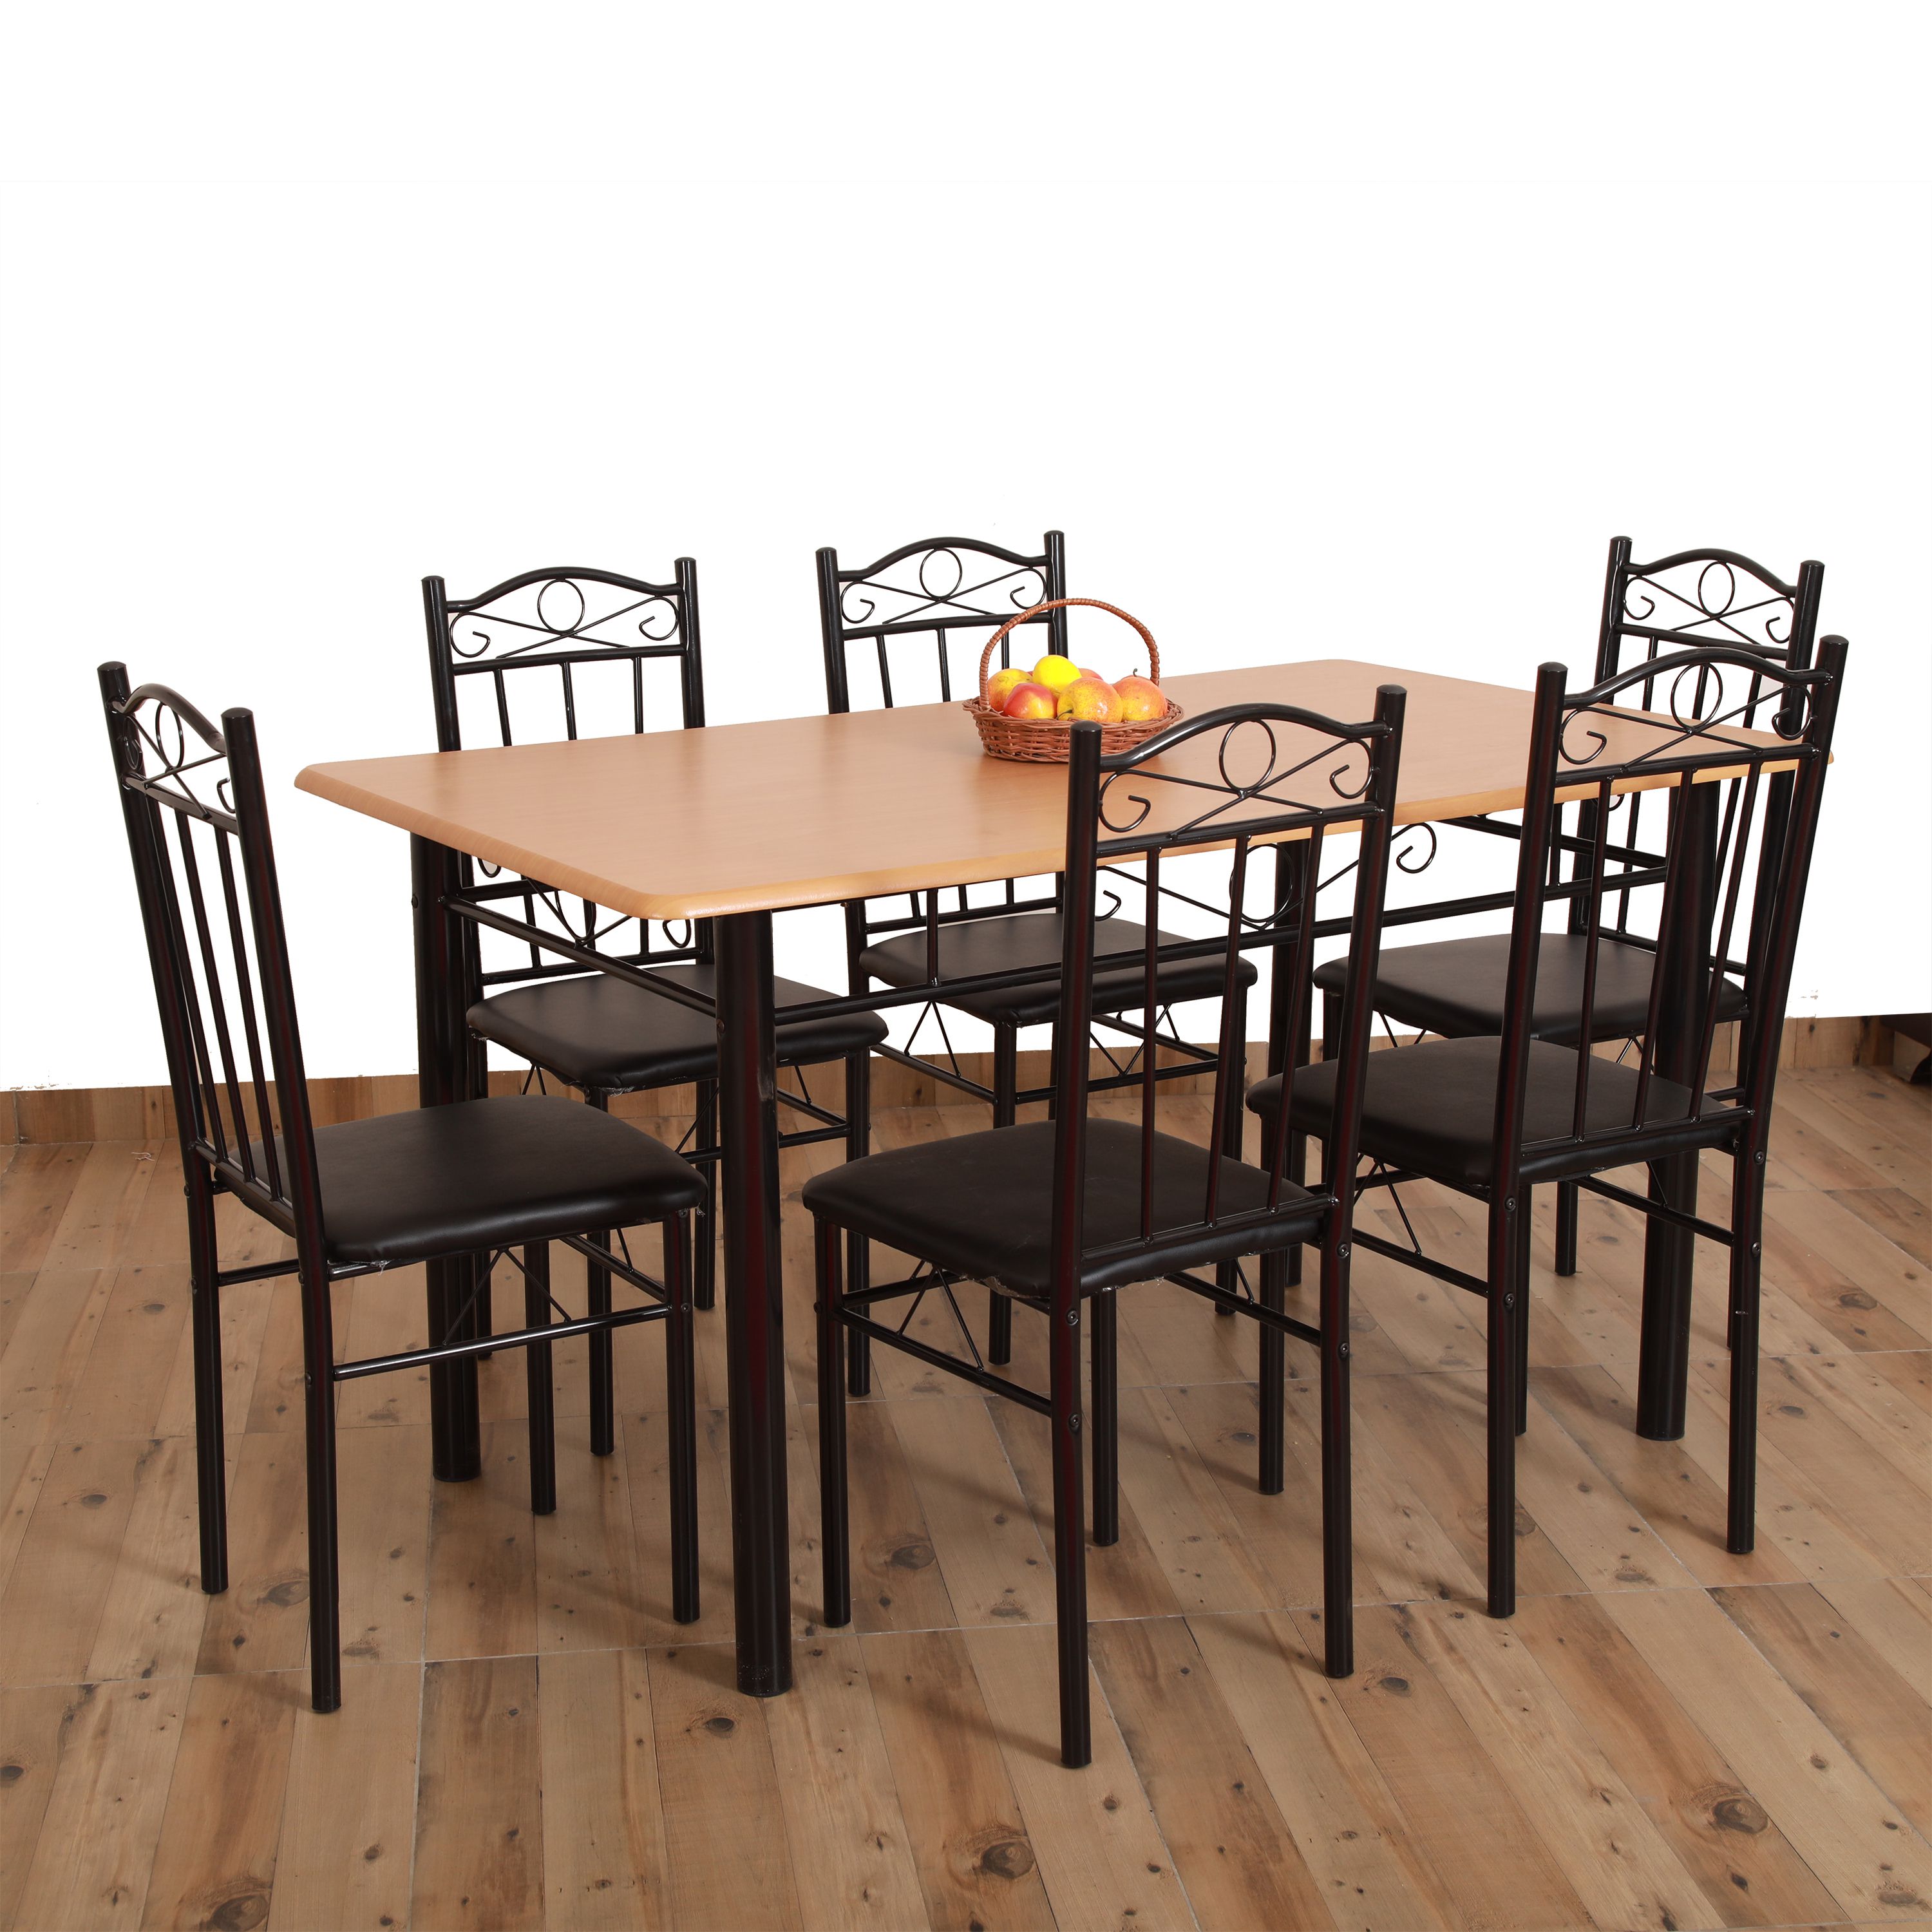 Eros 6 Seater Metal Plus Wooden Dining Set Dining Furniture Set Dining Table Buy Eros 6 Seater Metal Plus Wooden Dining Set Dining Furniture Set Dining Table Online At Best Prices In India On Snapdeal